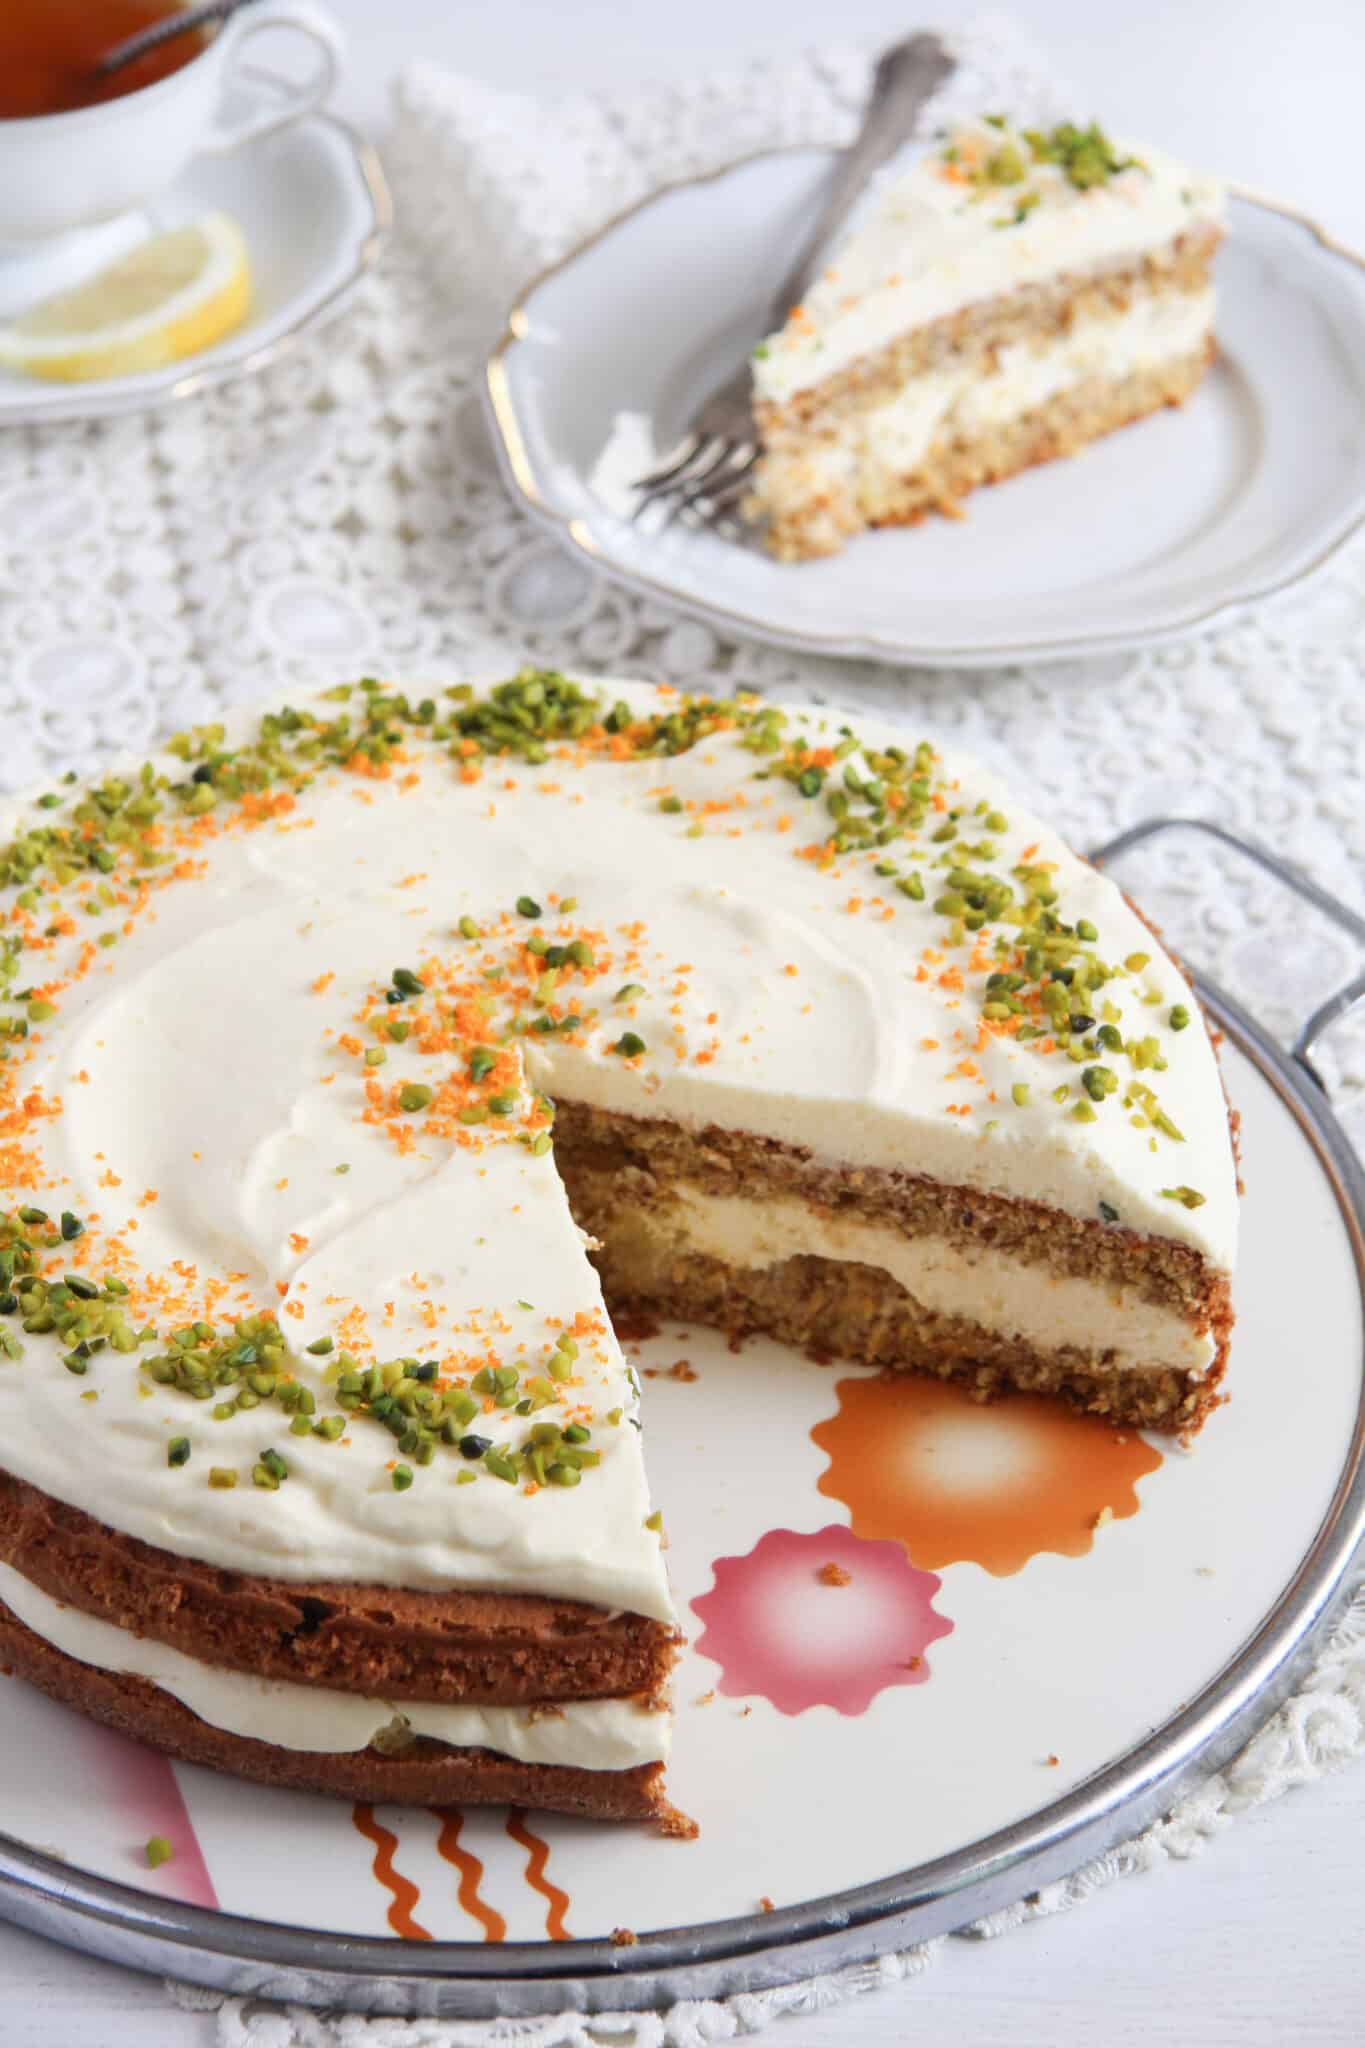 layered carrot cake with almonds and orange cream filling on a platter and a slice behind it.